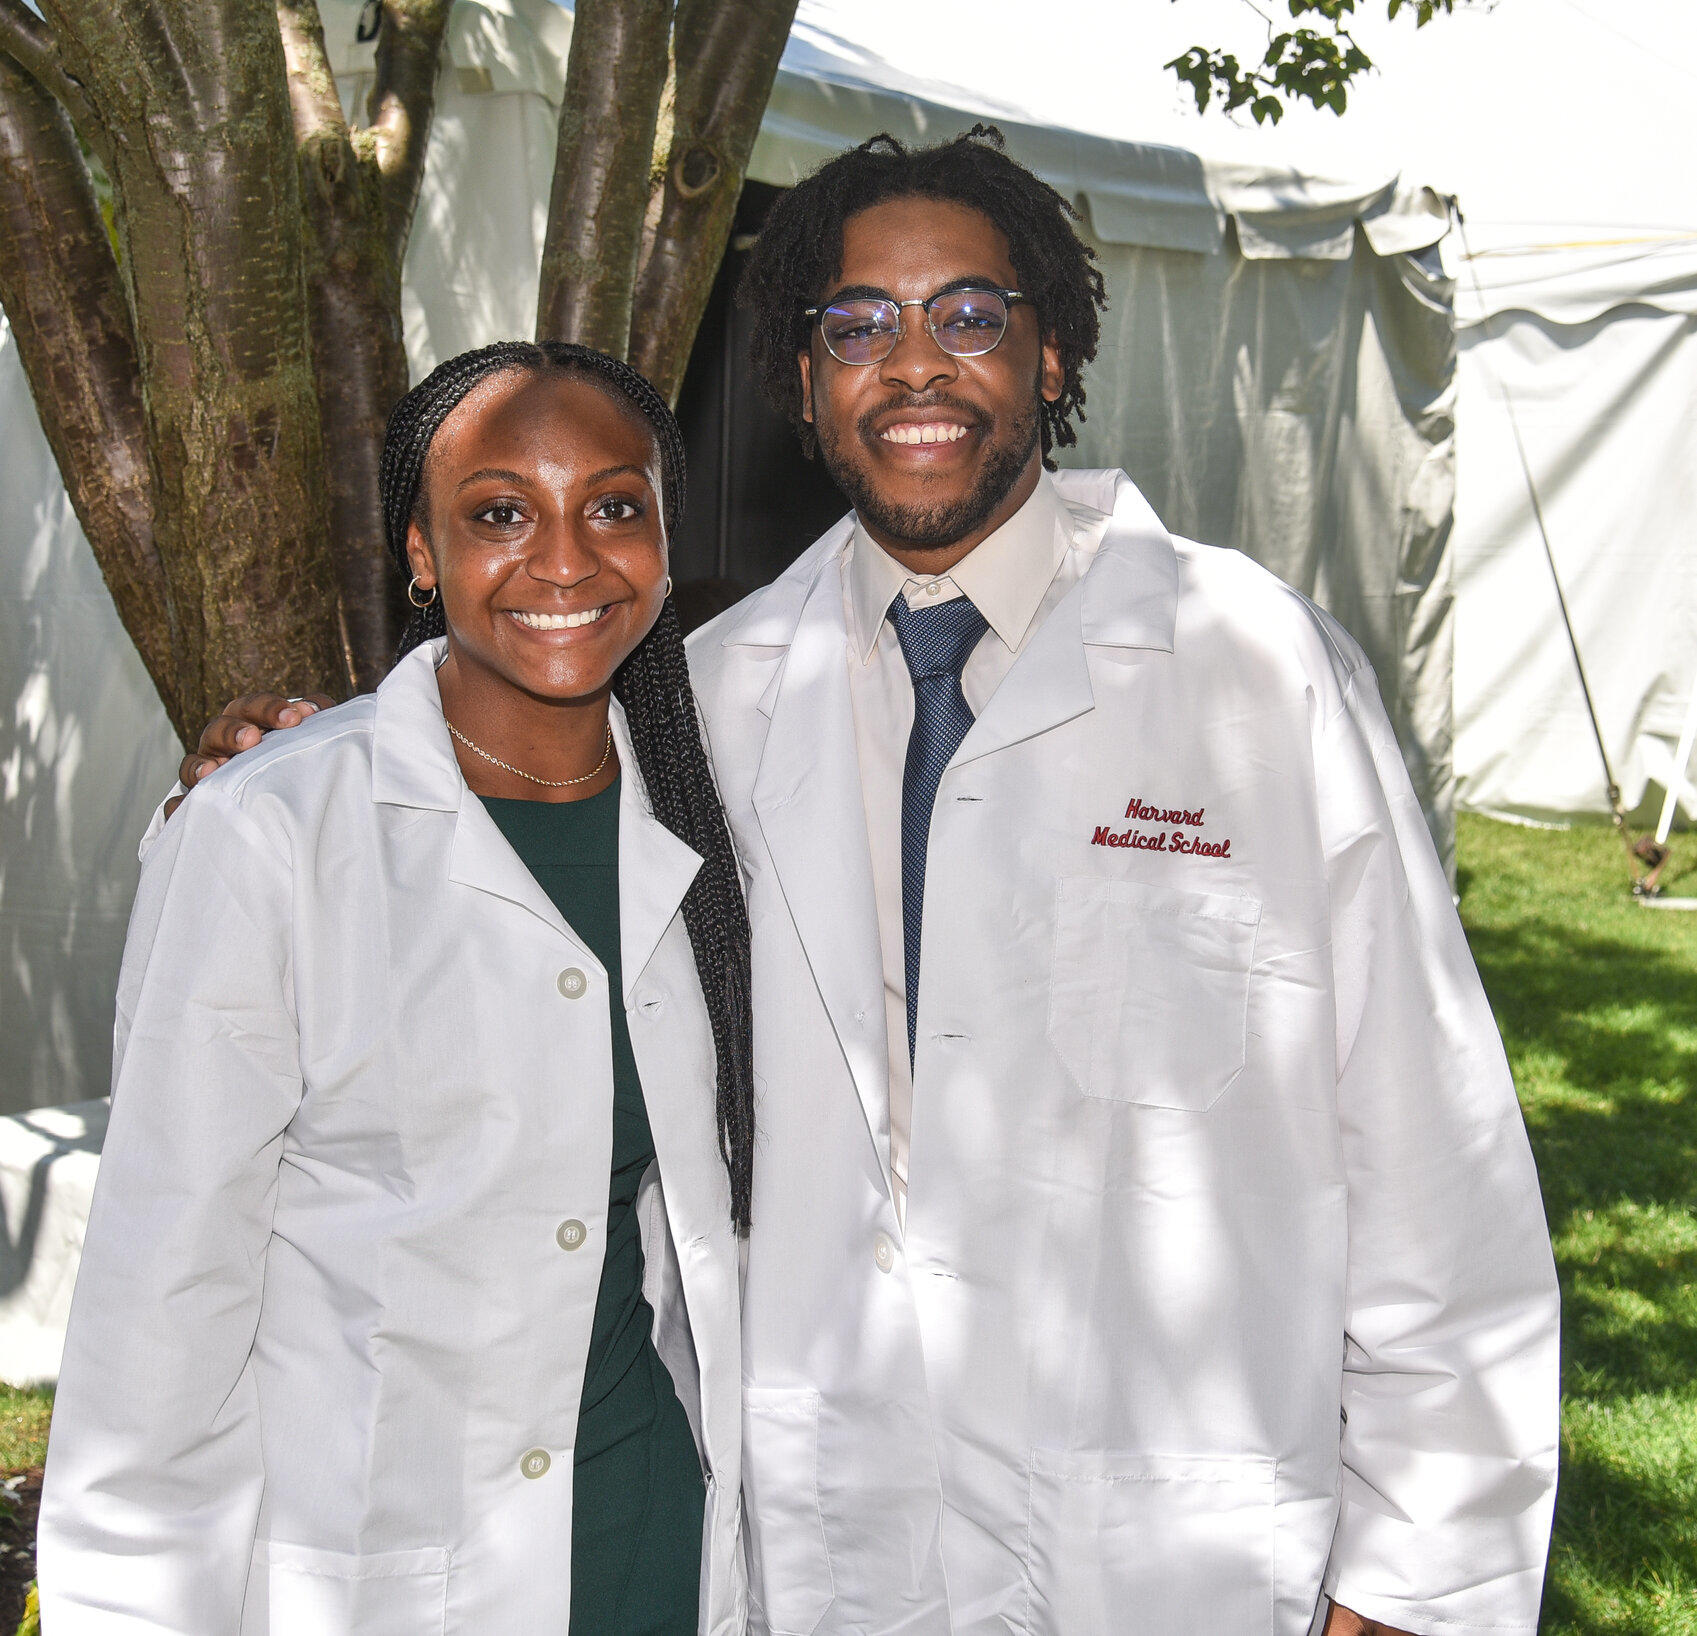 Two students standing together outside wearing HMS white coats